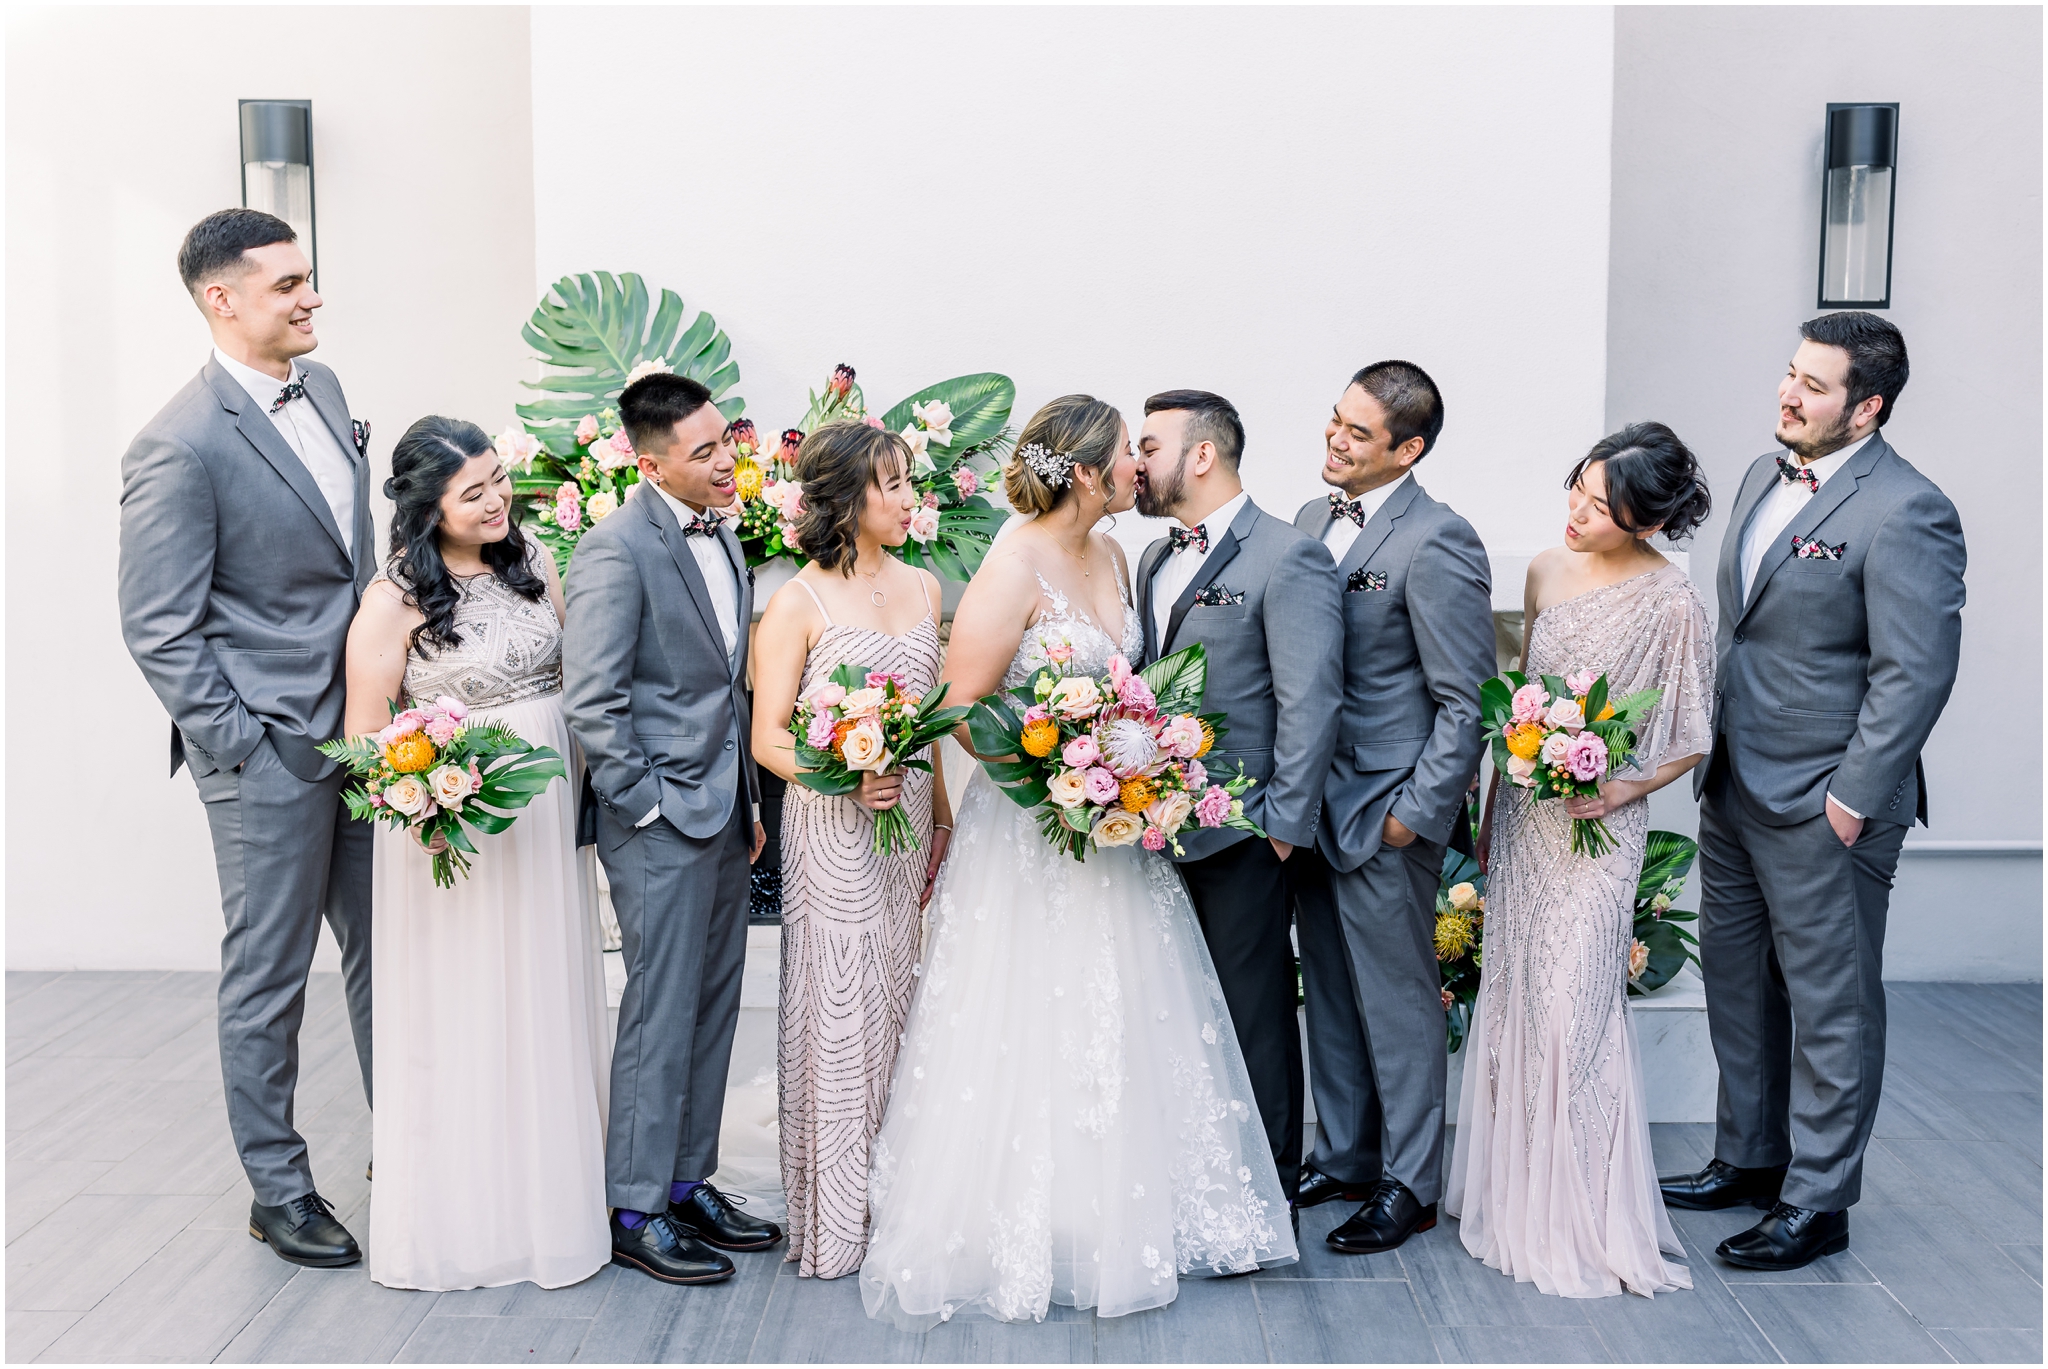 SoHo63 Tropical Wedding, Groom and Groomsmen, Grey Suits, Blush and Gold Bridesmaid Dresses